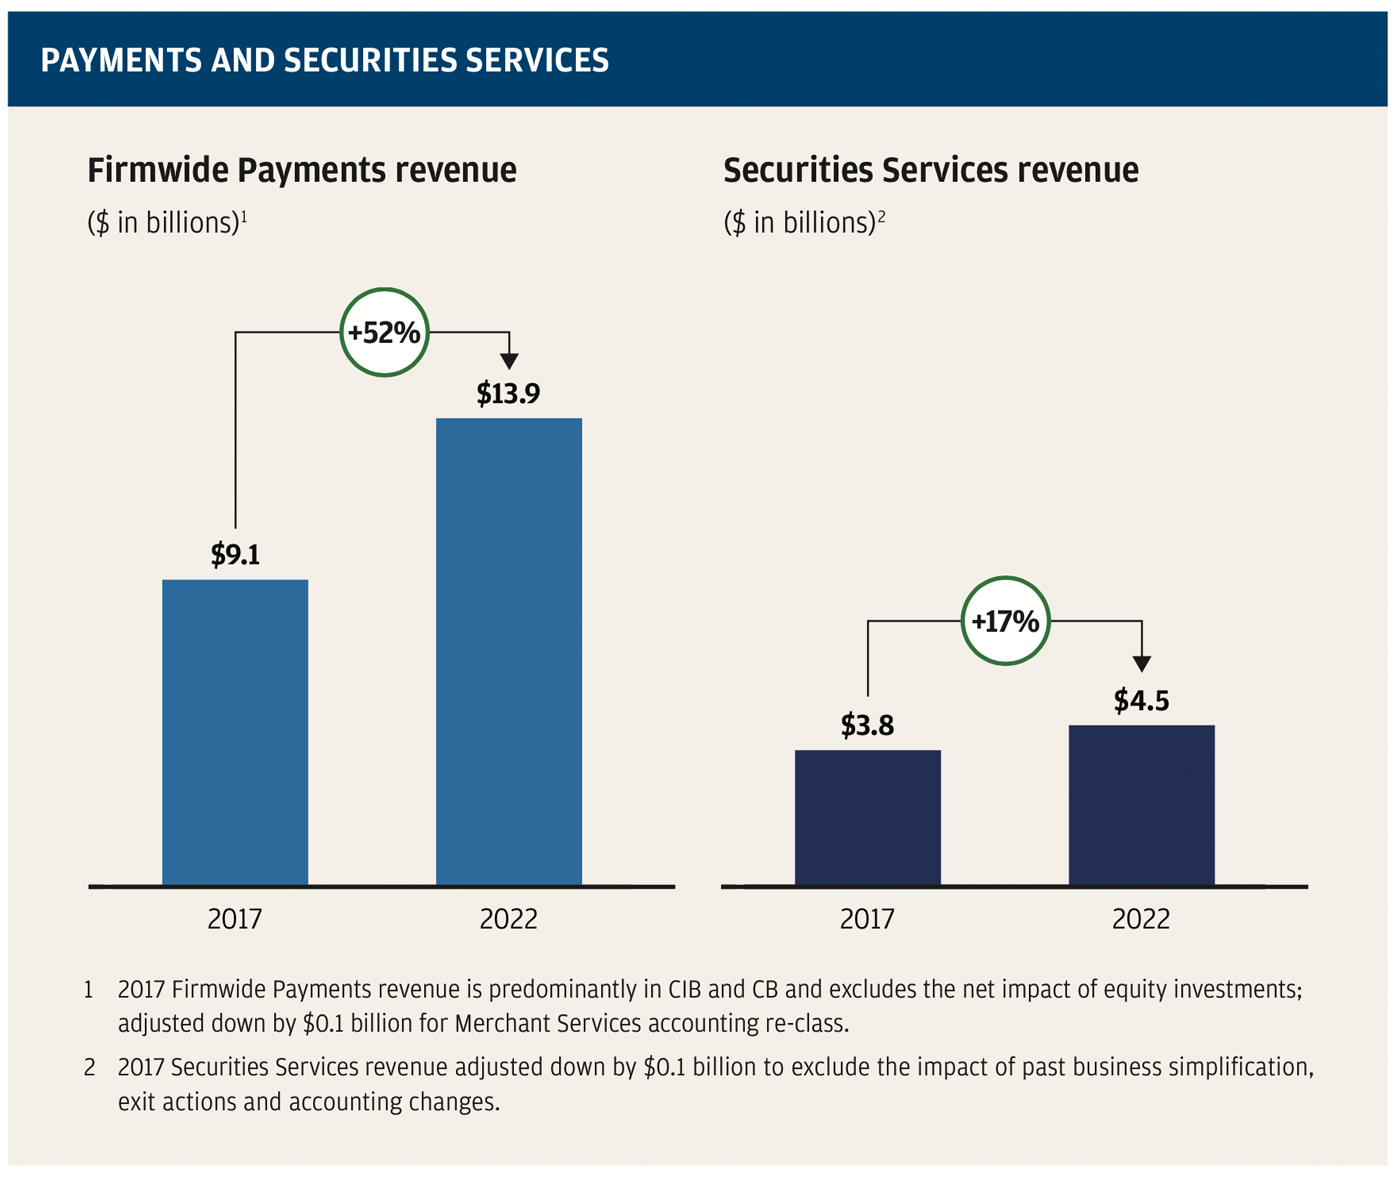 Firmwide Payments and Securities Services revenue